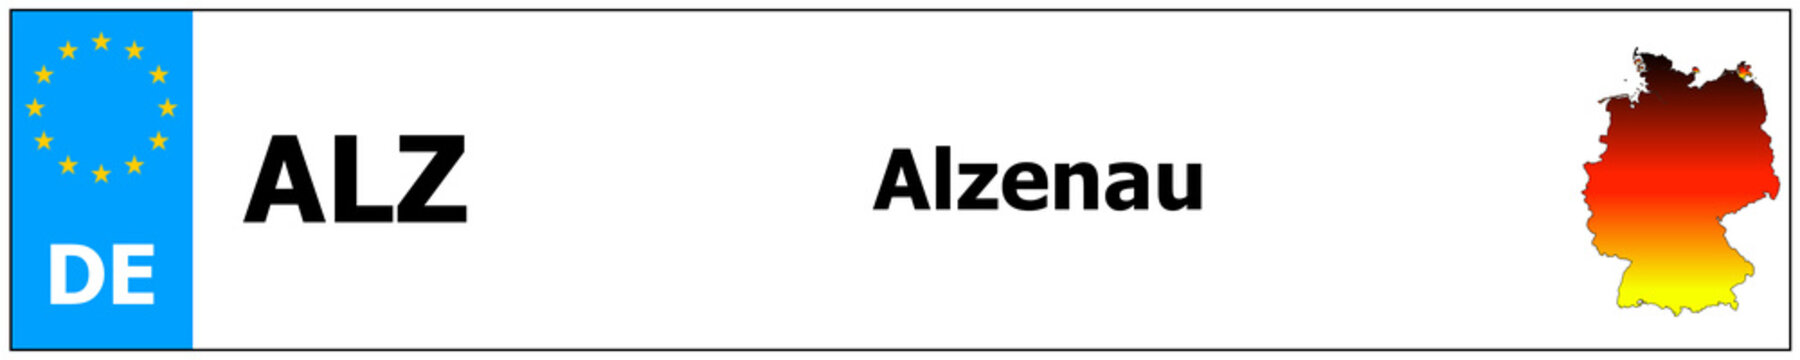 Alzenau car licence plate sticker name and map of Germany. Vehicle registration plates frames German number